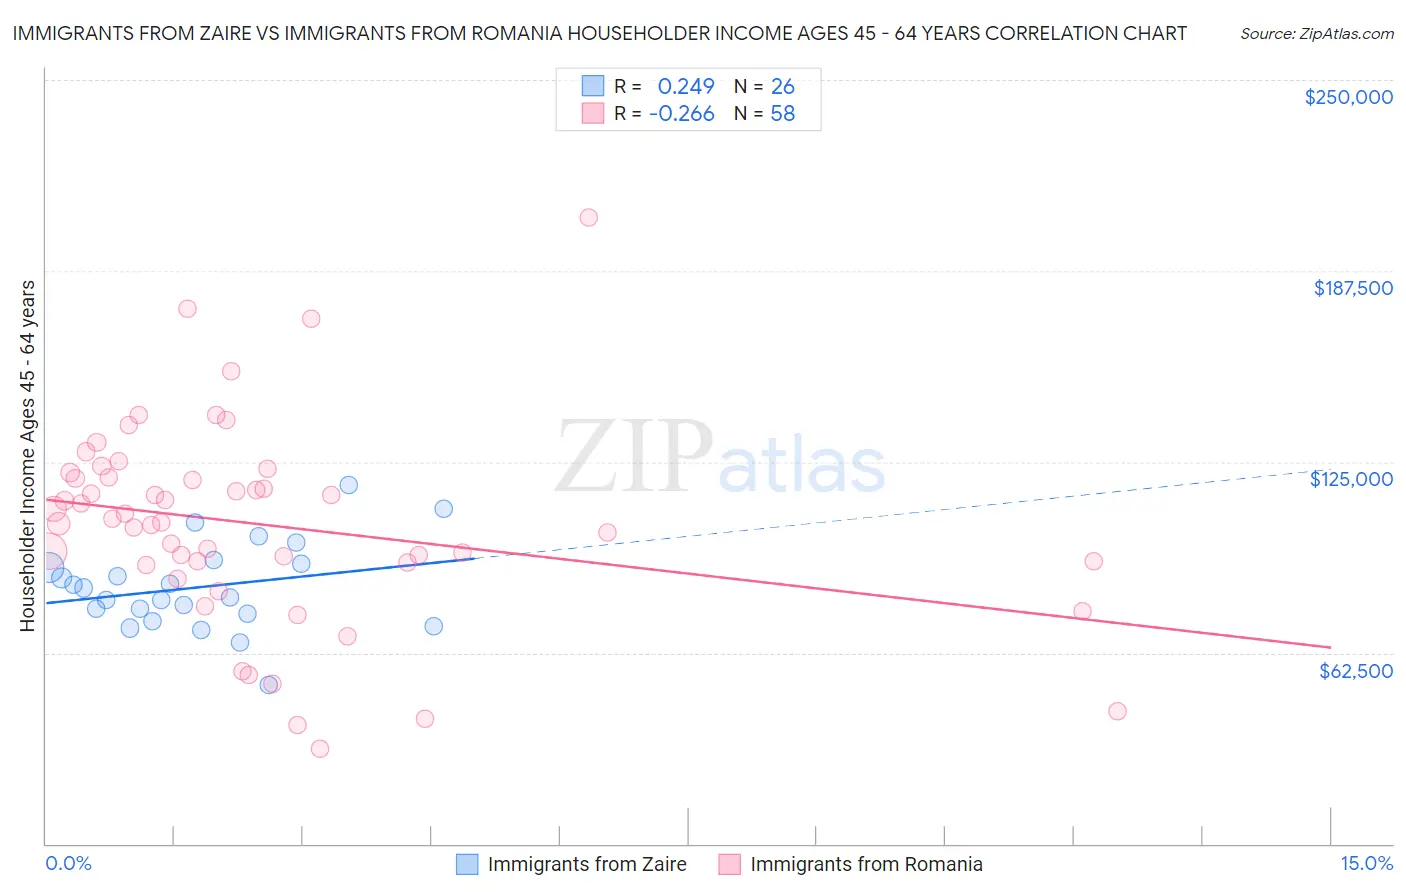 Immigrants from Zaire vs Immigrants from Romania Householder Income Ages 45 - 64 years